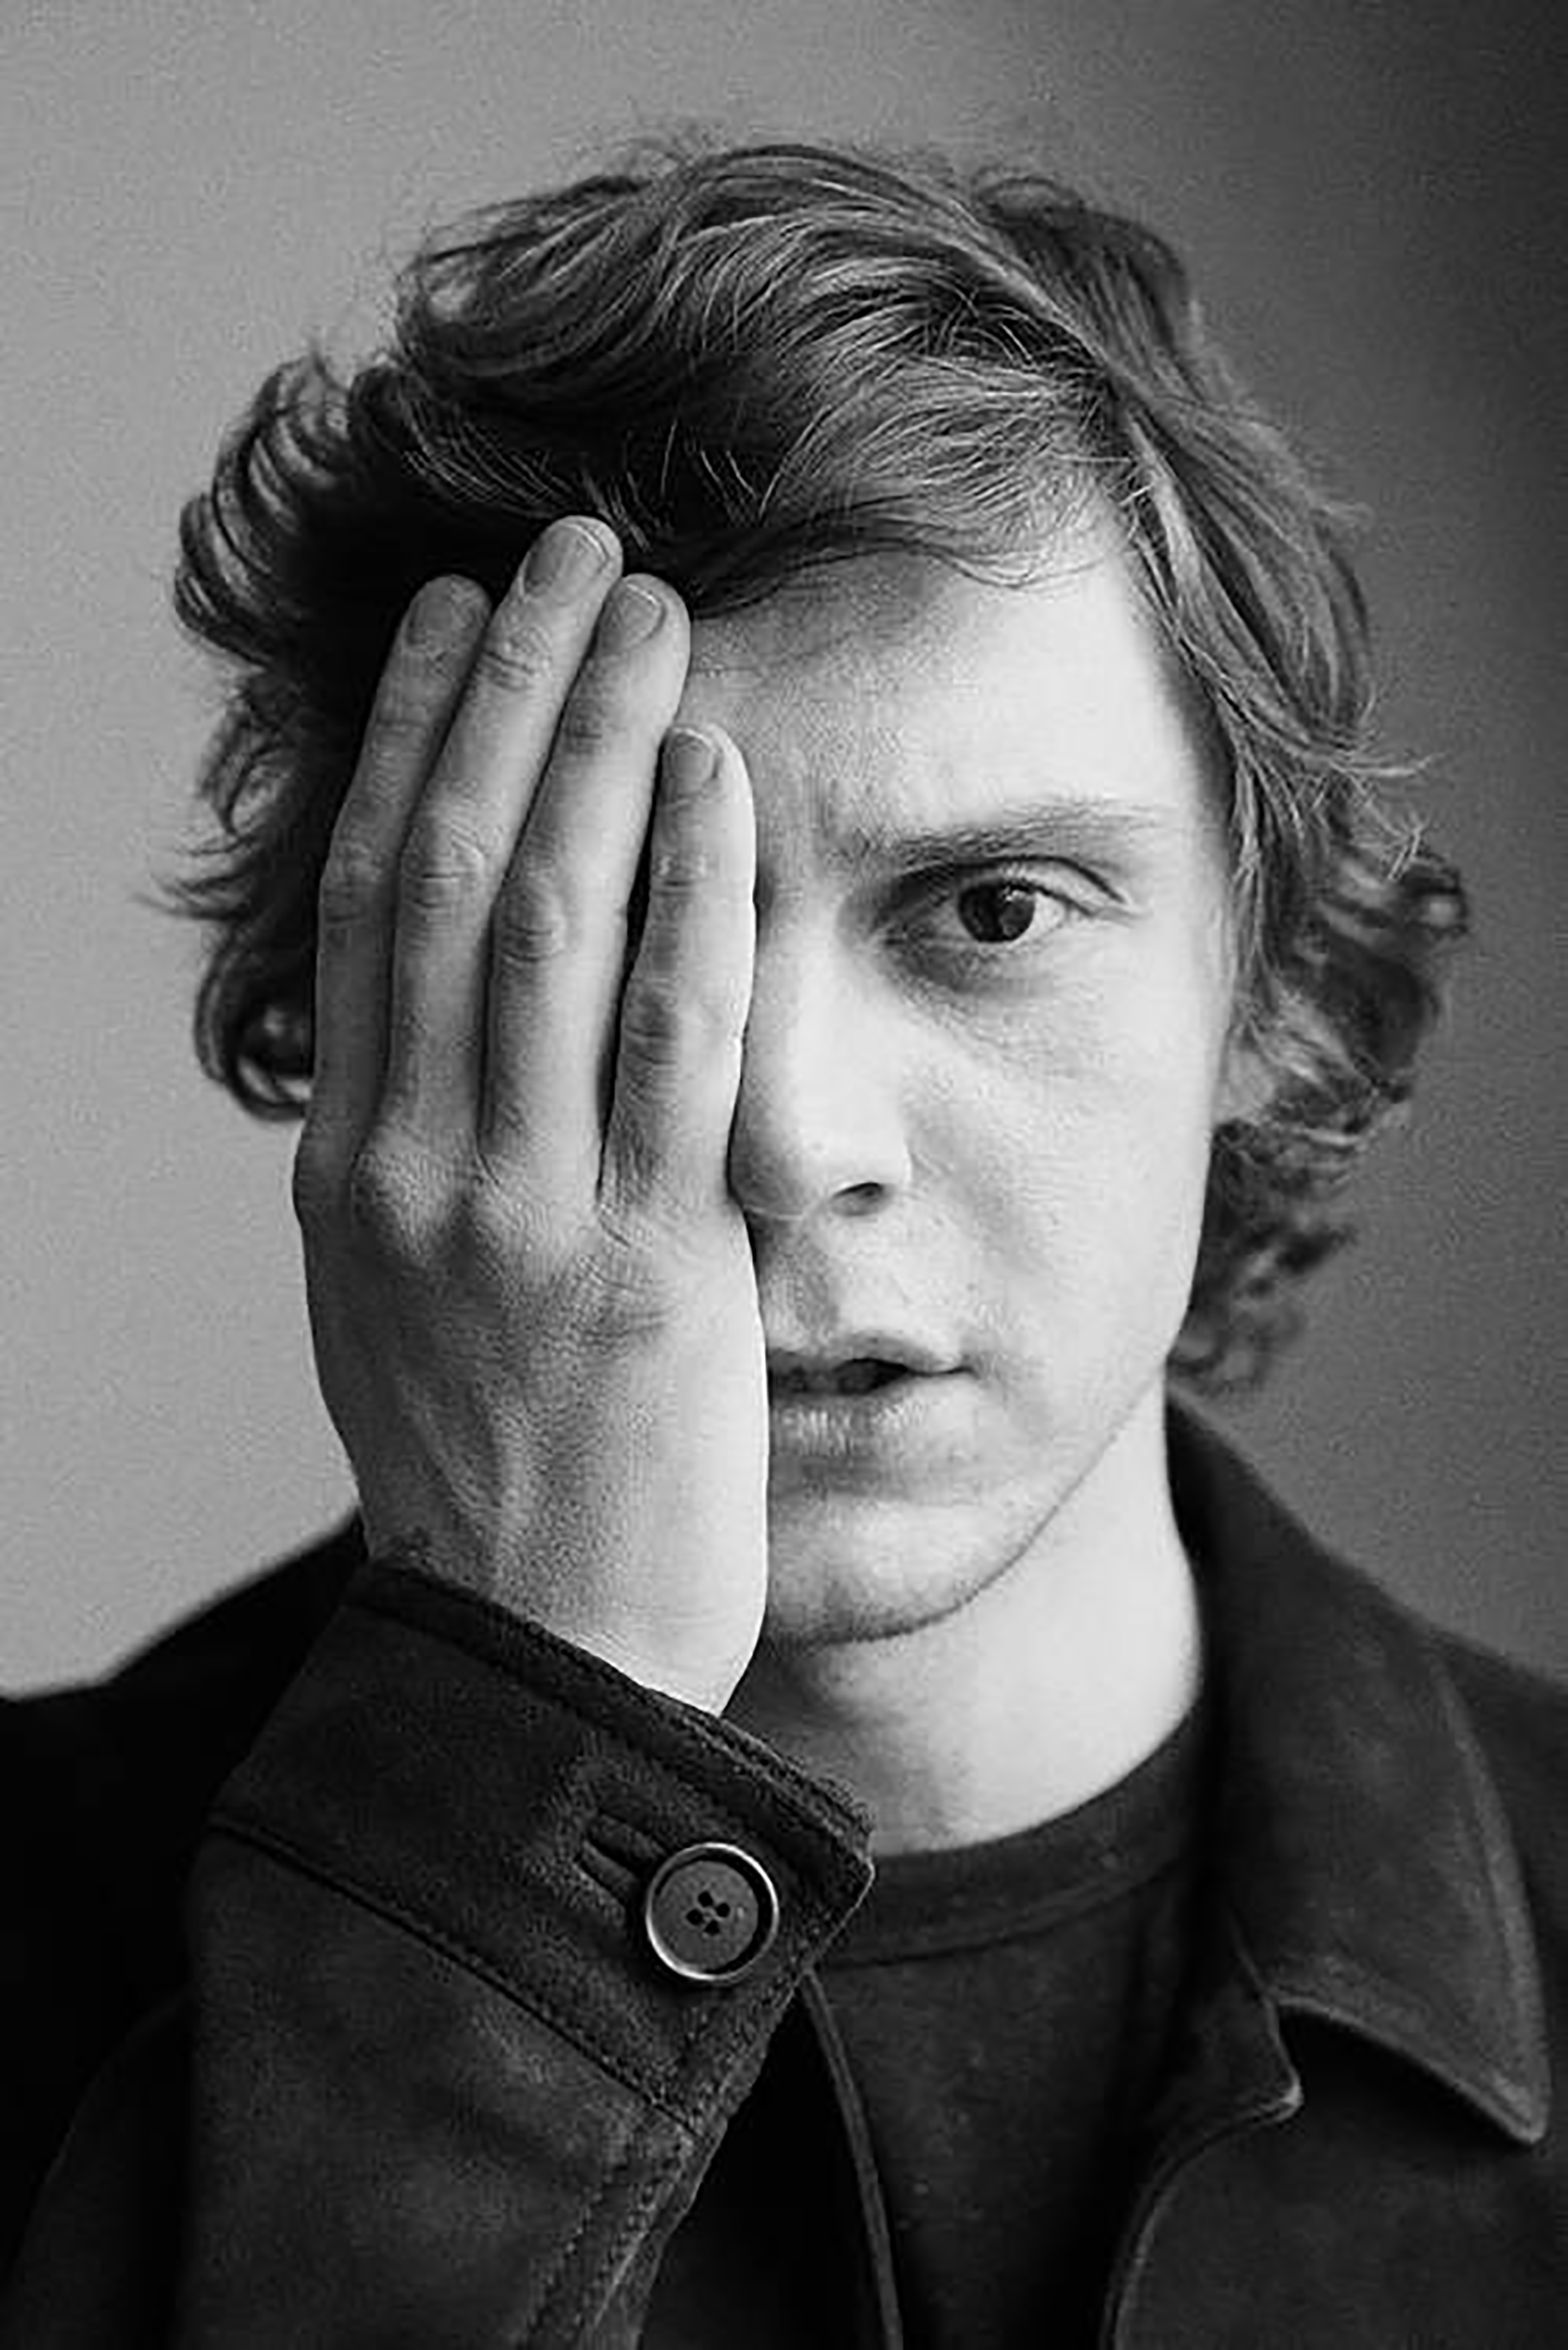 evan-peters-opens-up-about-his-role-in-pose-04.jpg